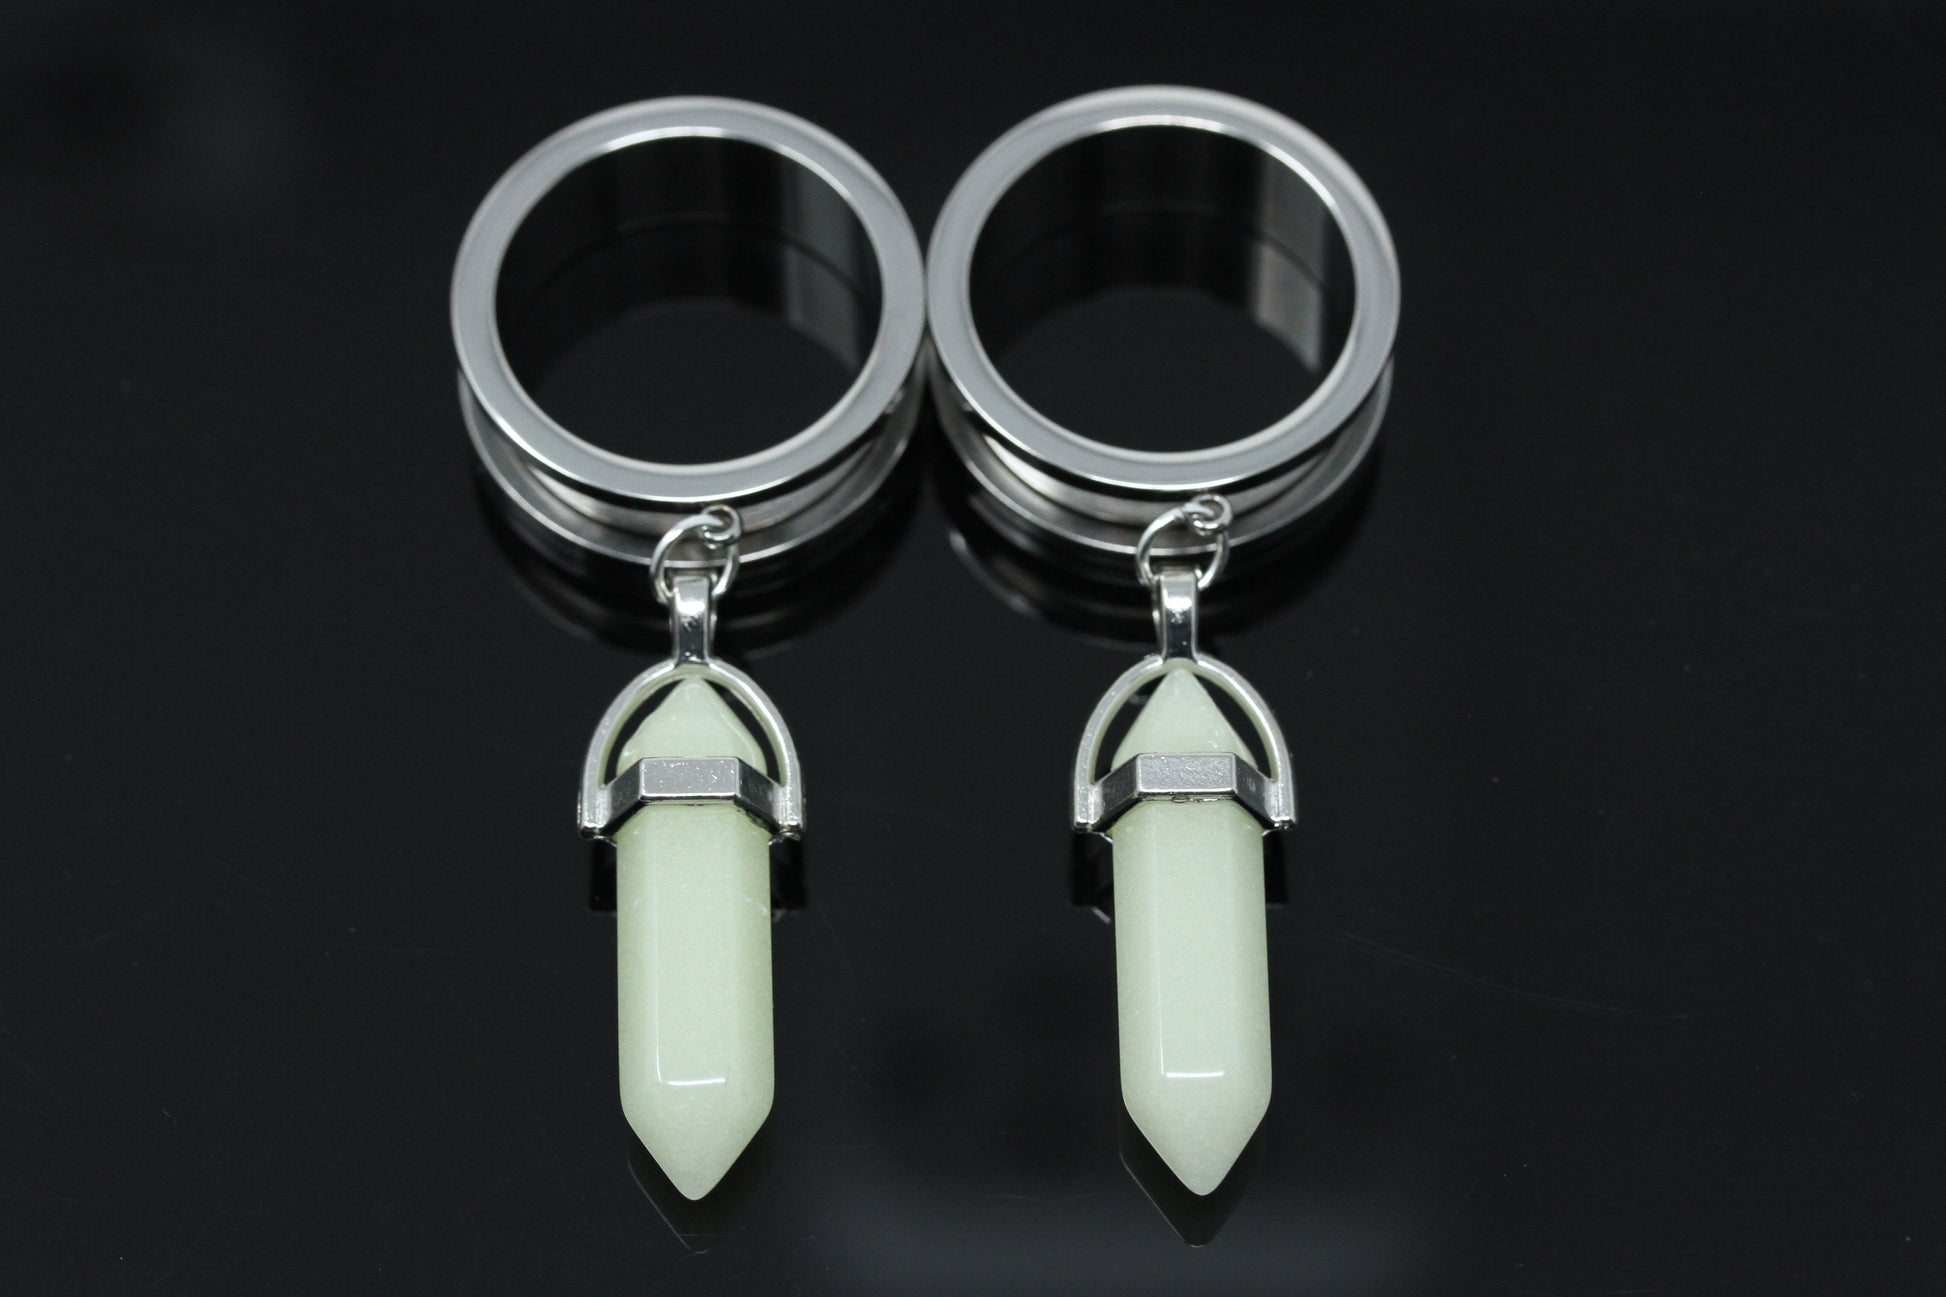 Stainless steel tunnel danglers